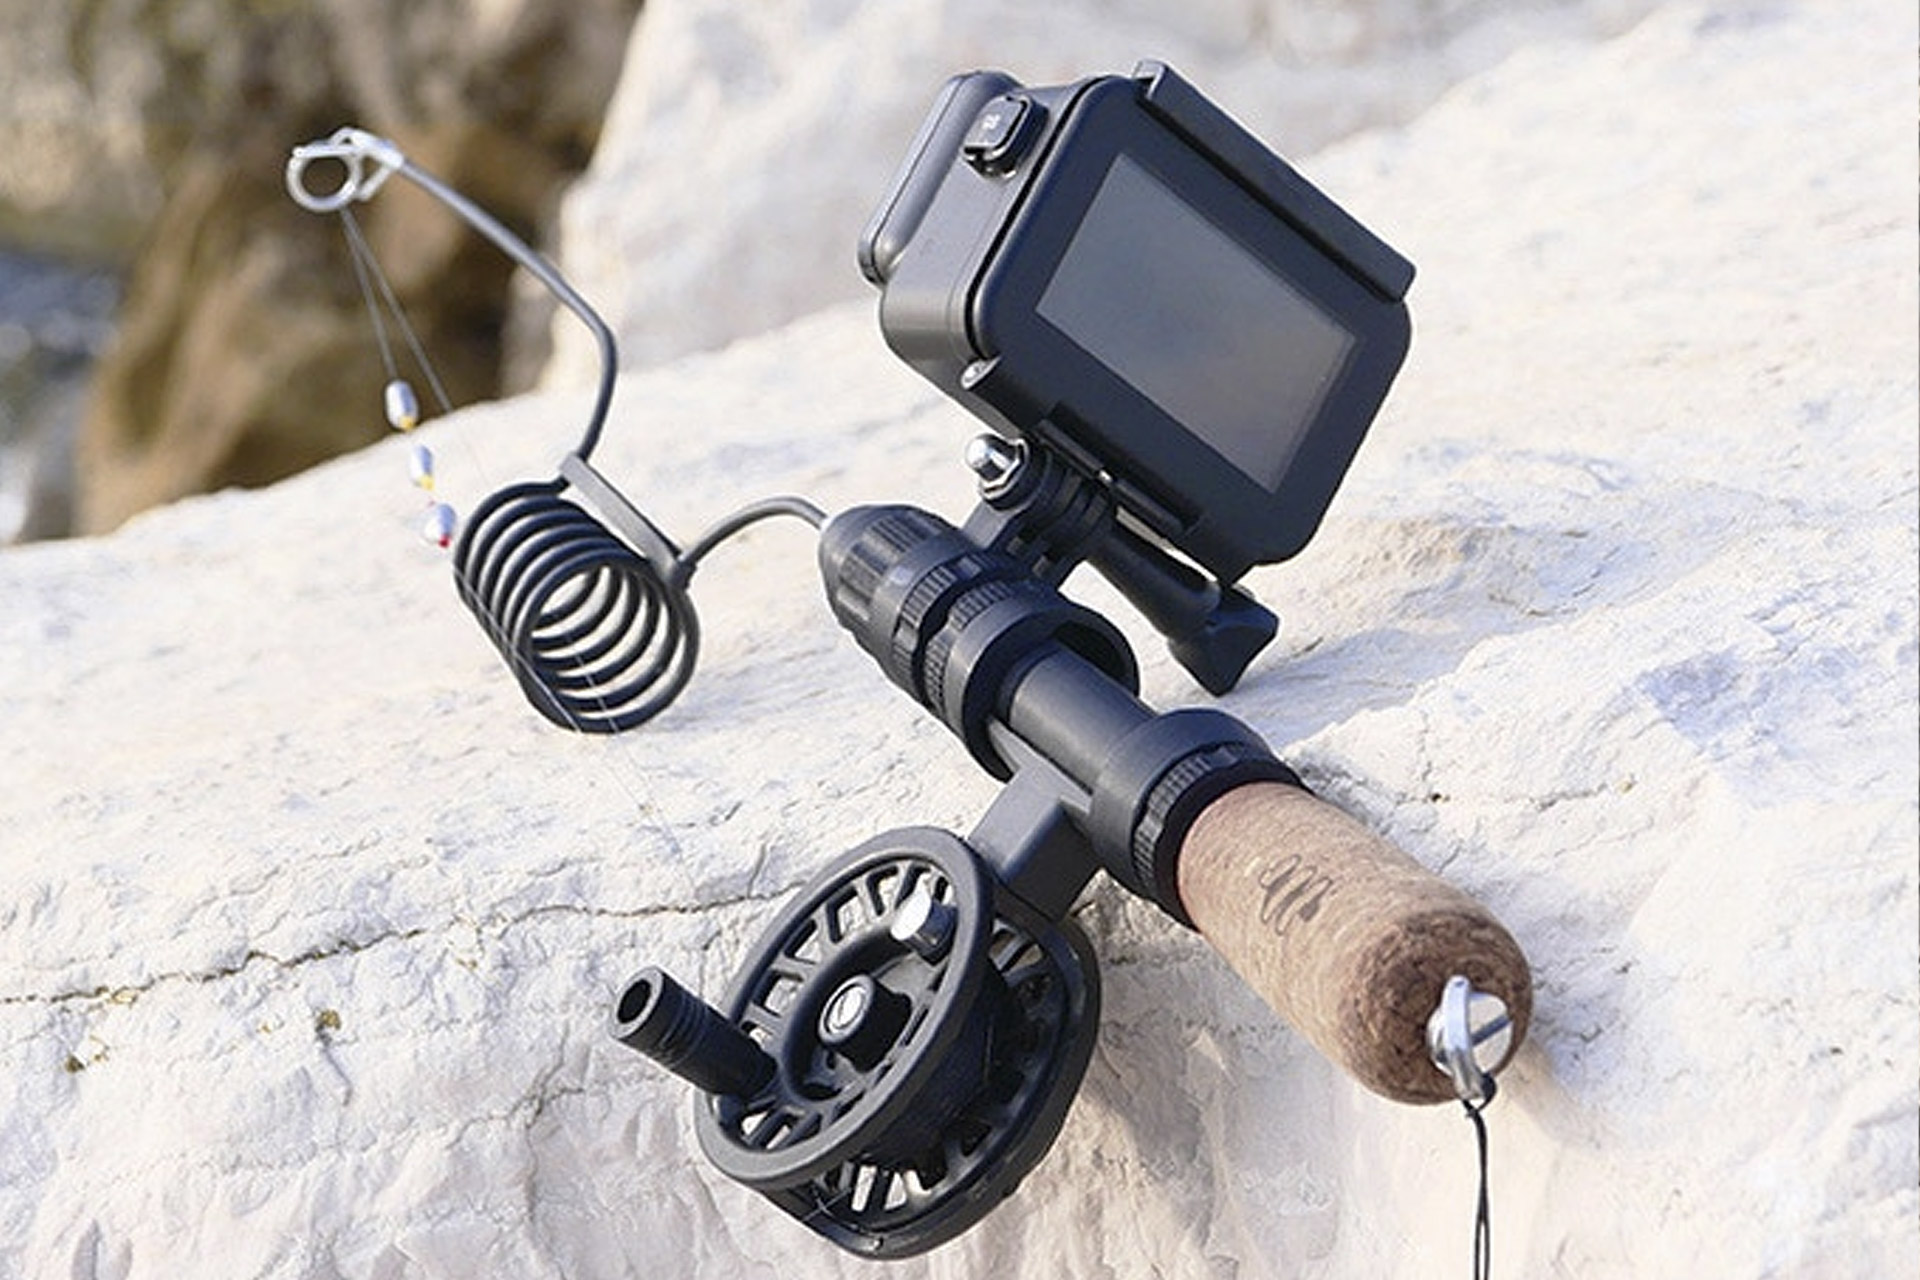 Wor.my Travel Fishing System | Uncrate, #Wormy #Travel #Fishing #System #Uncrate